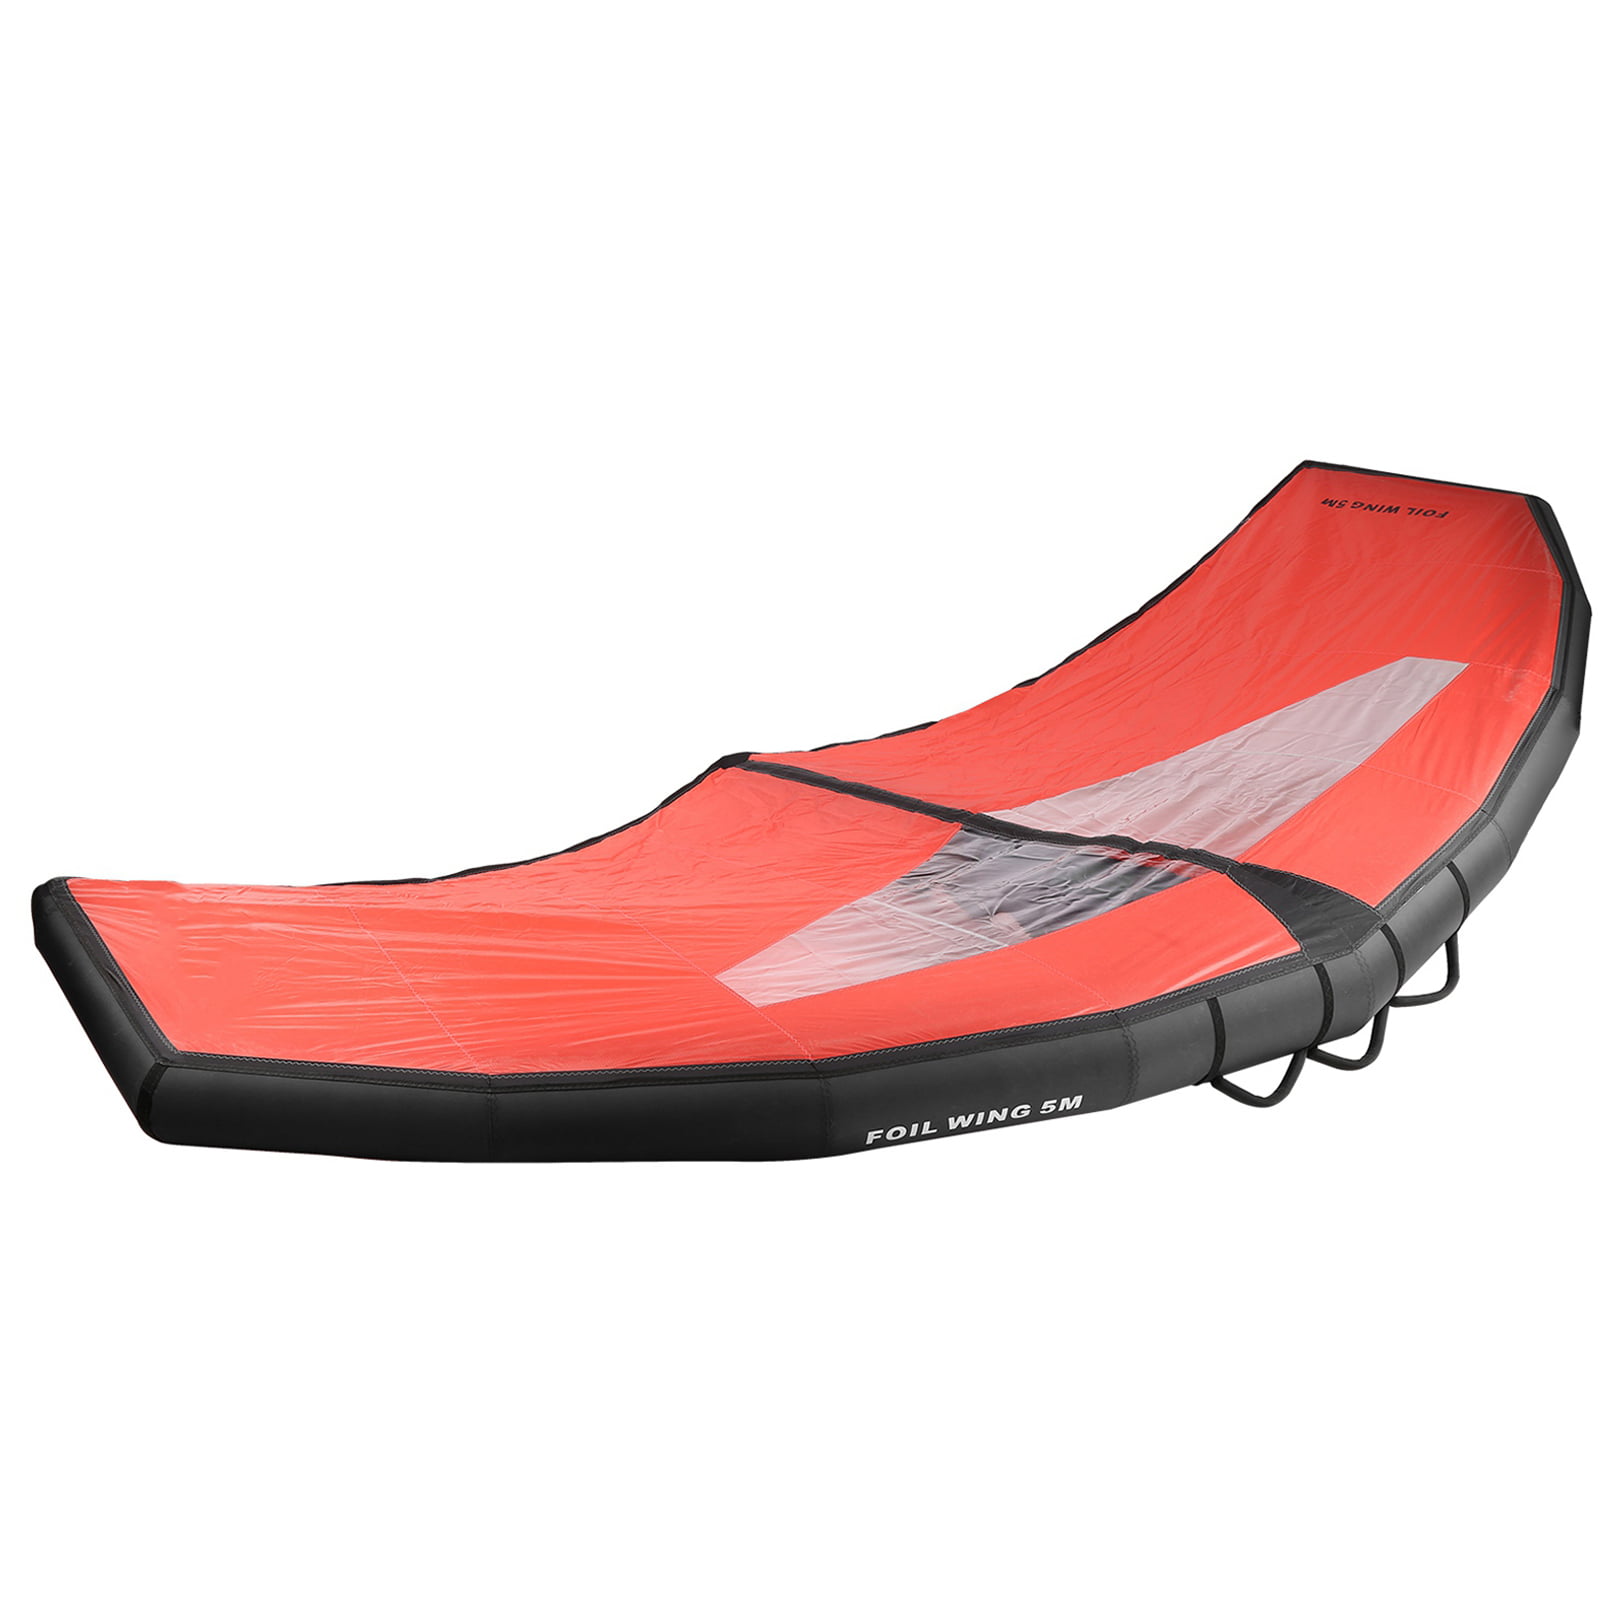 Details about   Lightweight Handheld Flying Wing Inflatable Surfboard For Surfing Water Sports 